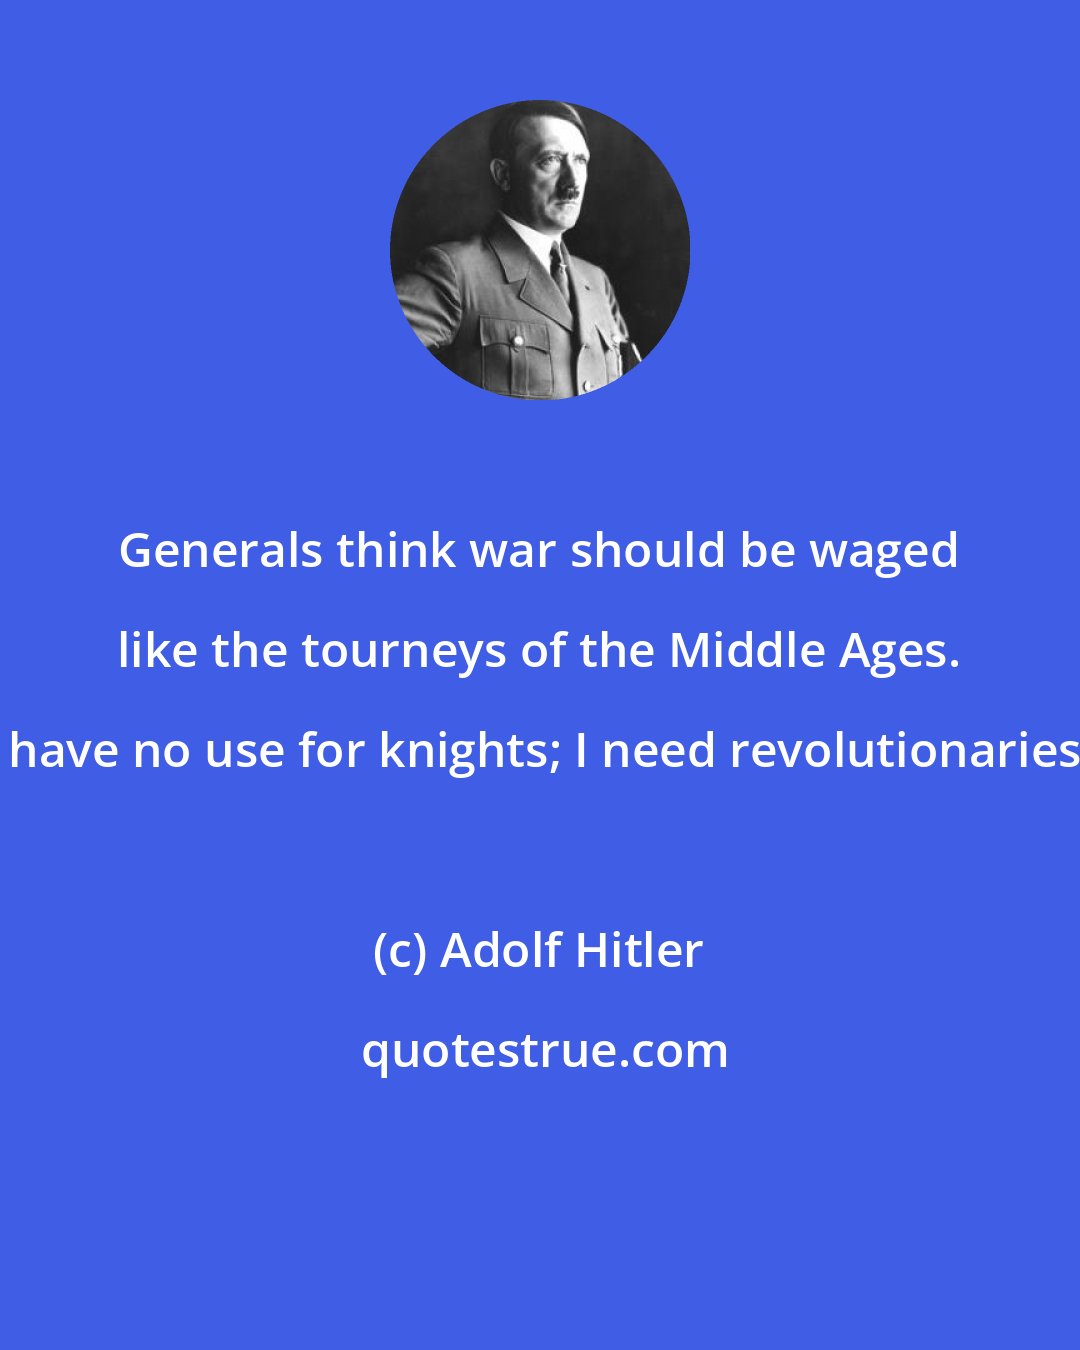 Adolf Hitler: Generals think war should be waged like the tourneys of the Middle Ages. I have no use for knights; I need revolutionaries.